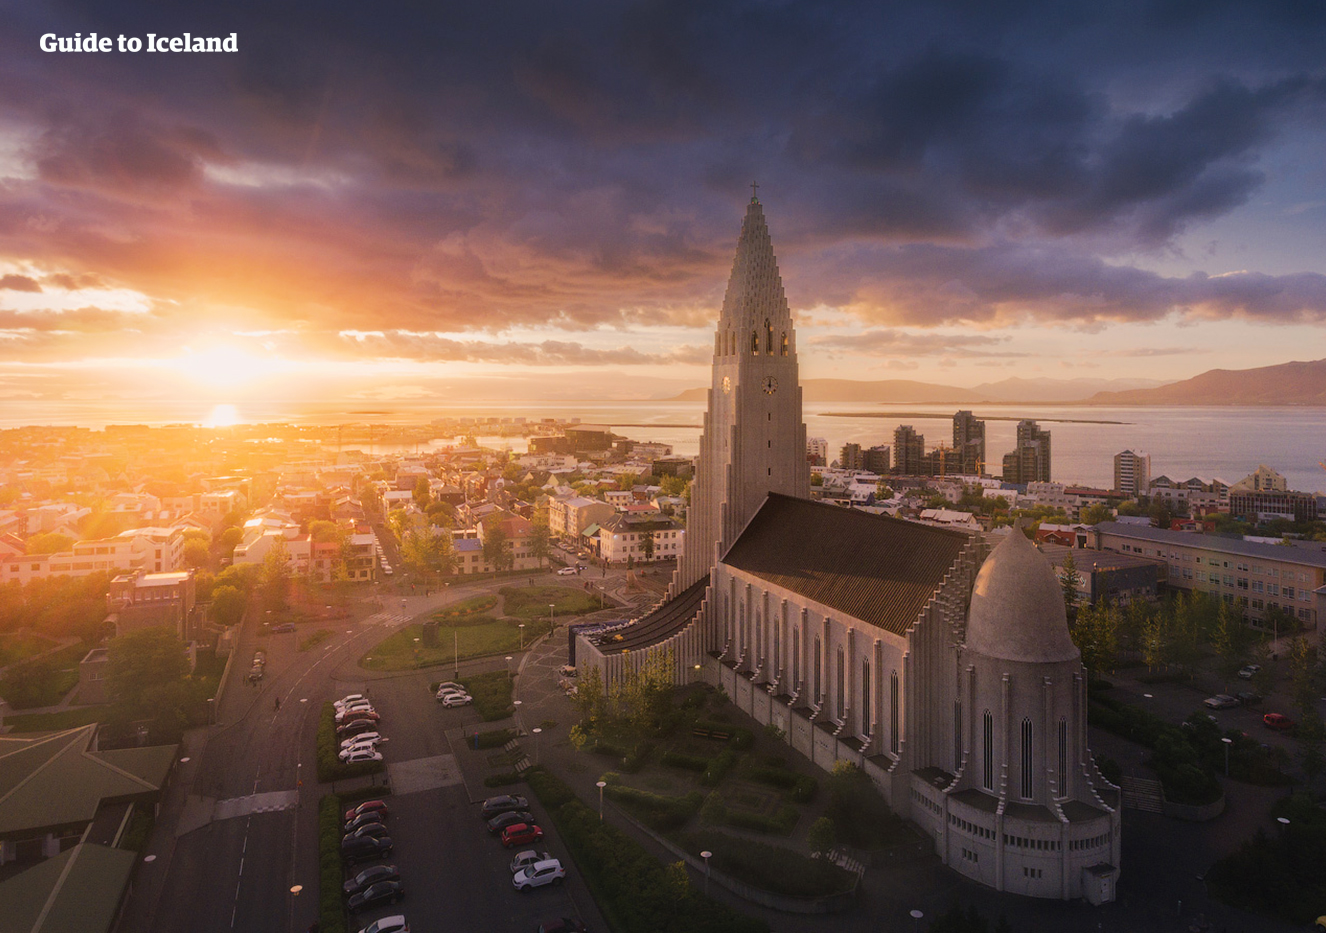 Spend a day discovering the beautiful city of Reykjavík on your 8-day summer package.